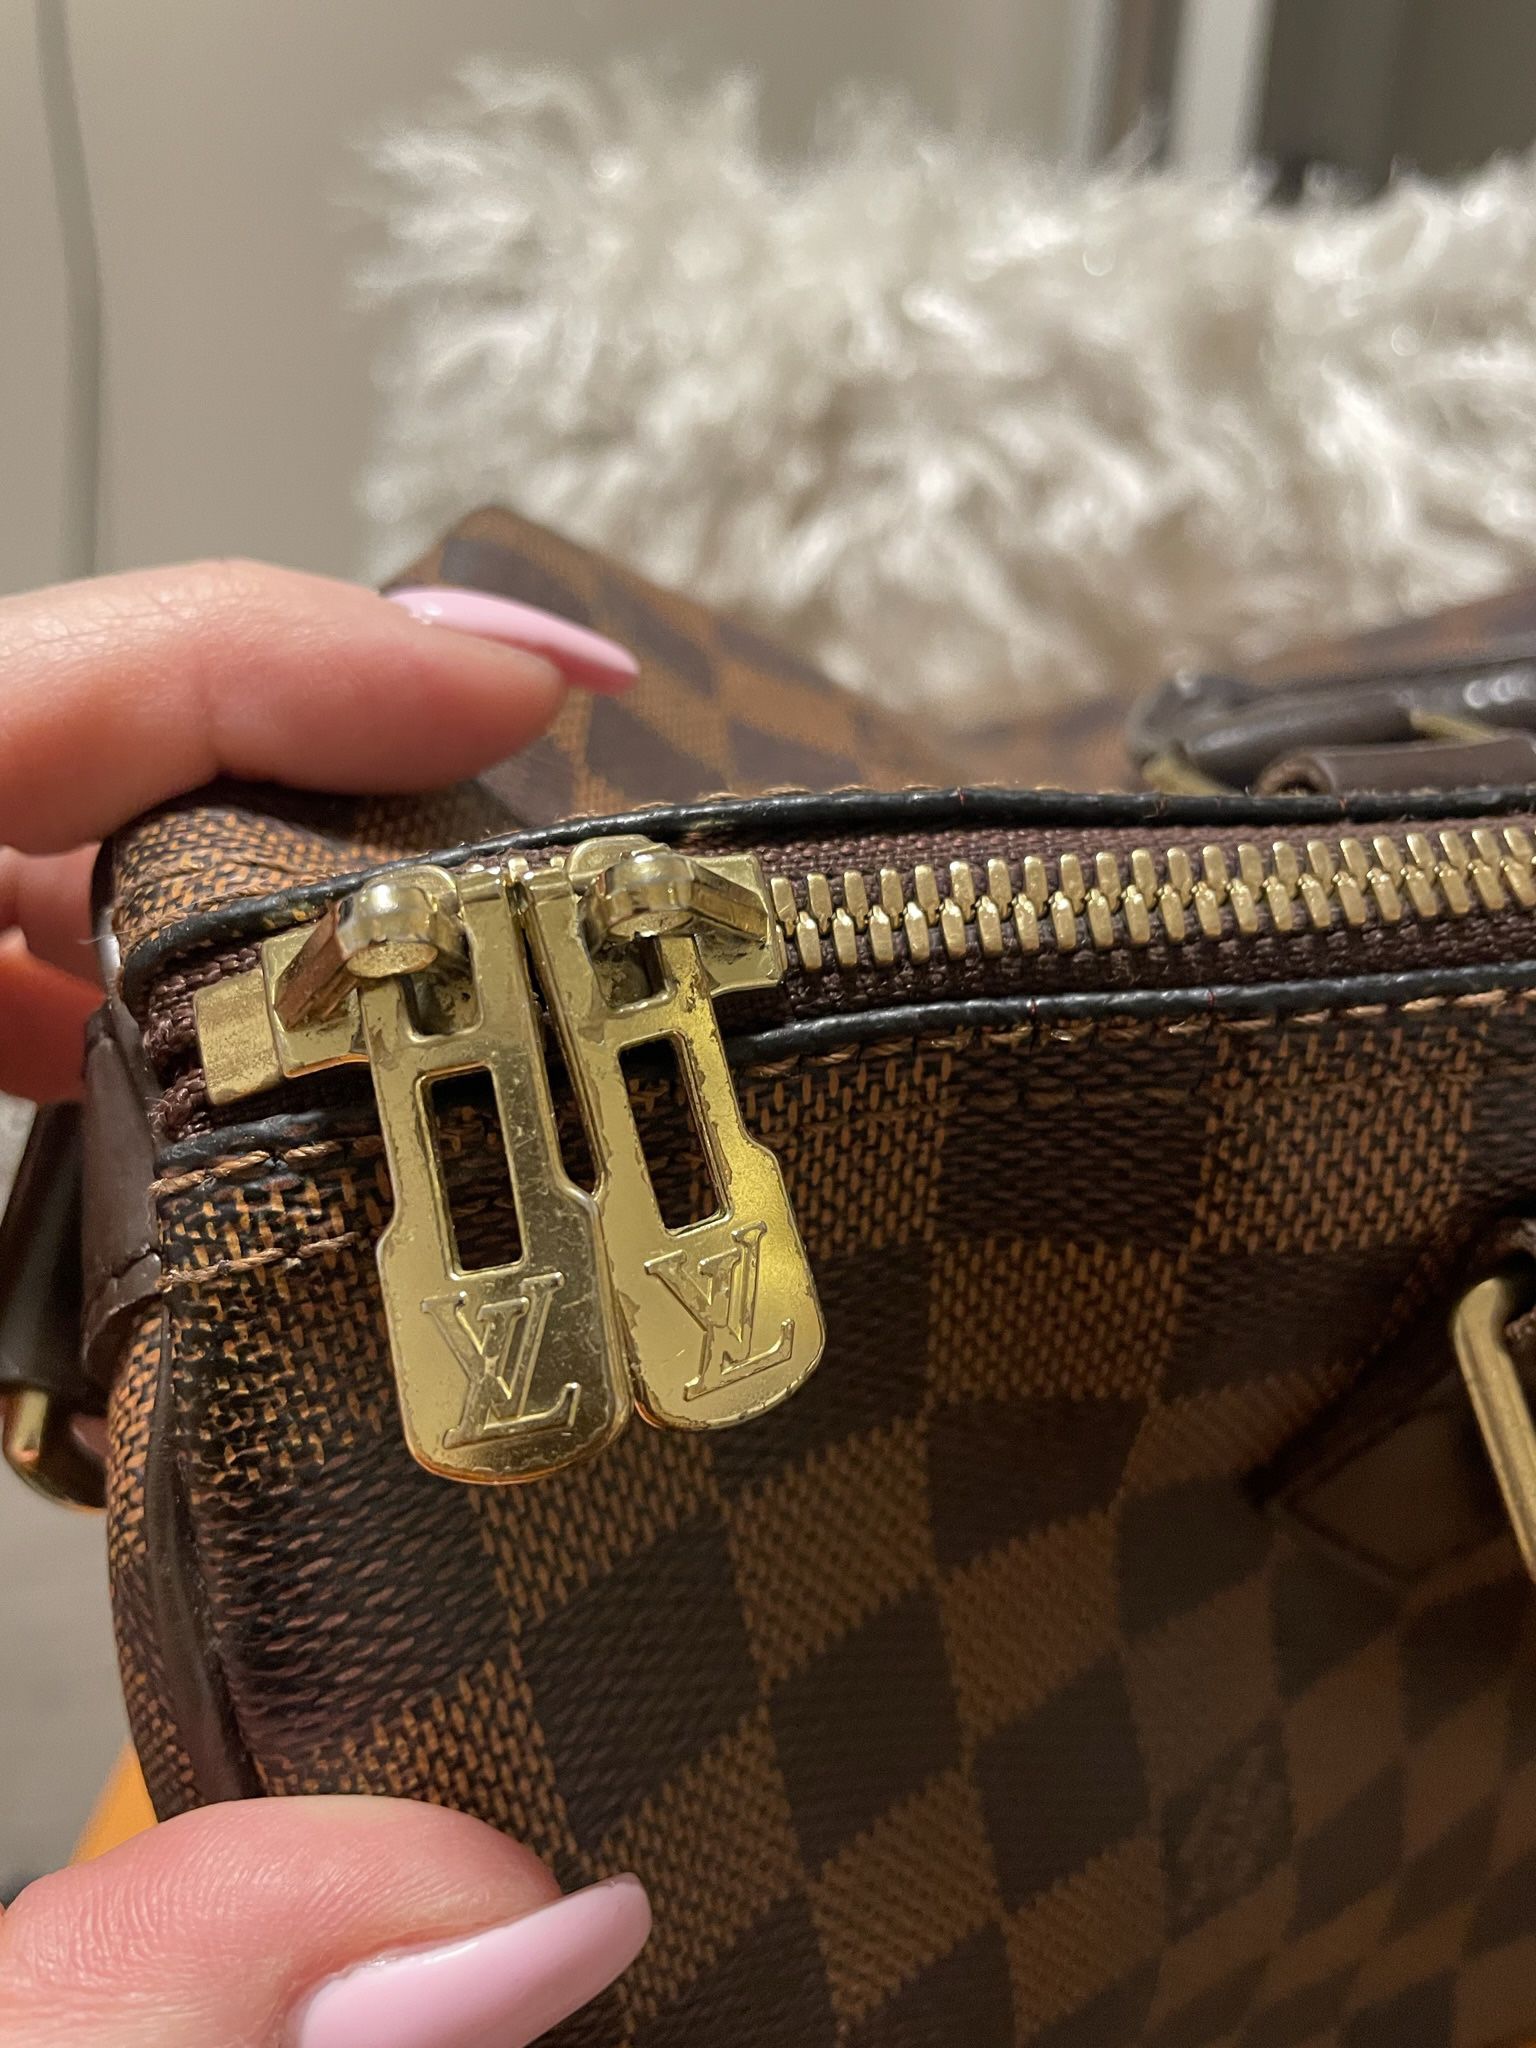 Used Authentic Louis Vuitton Speedy 30 crossbody for Sale in Vista